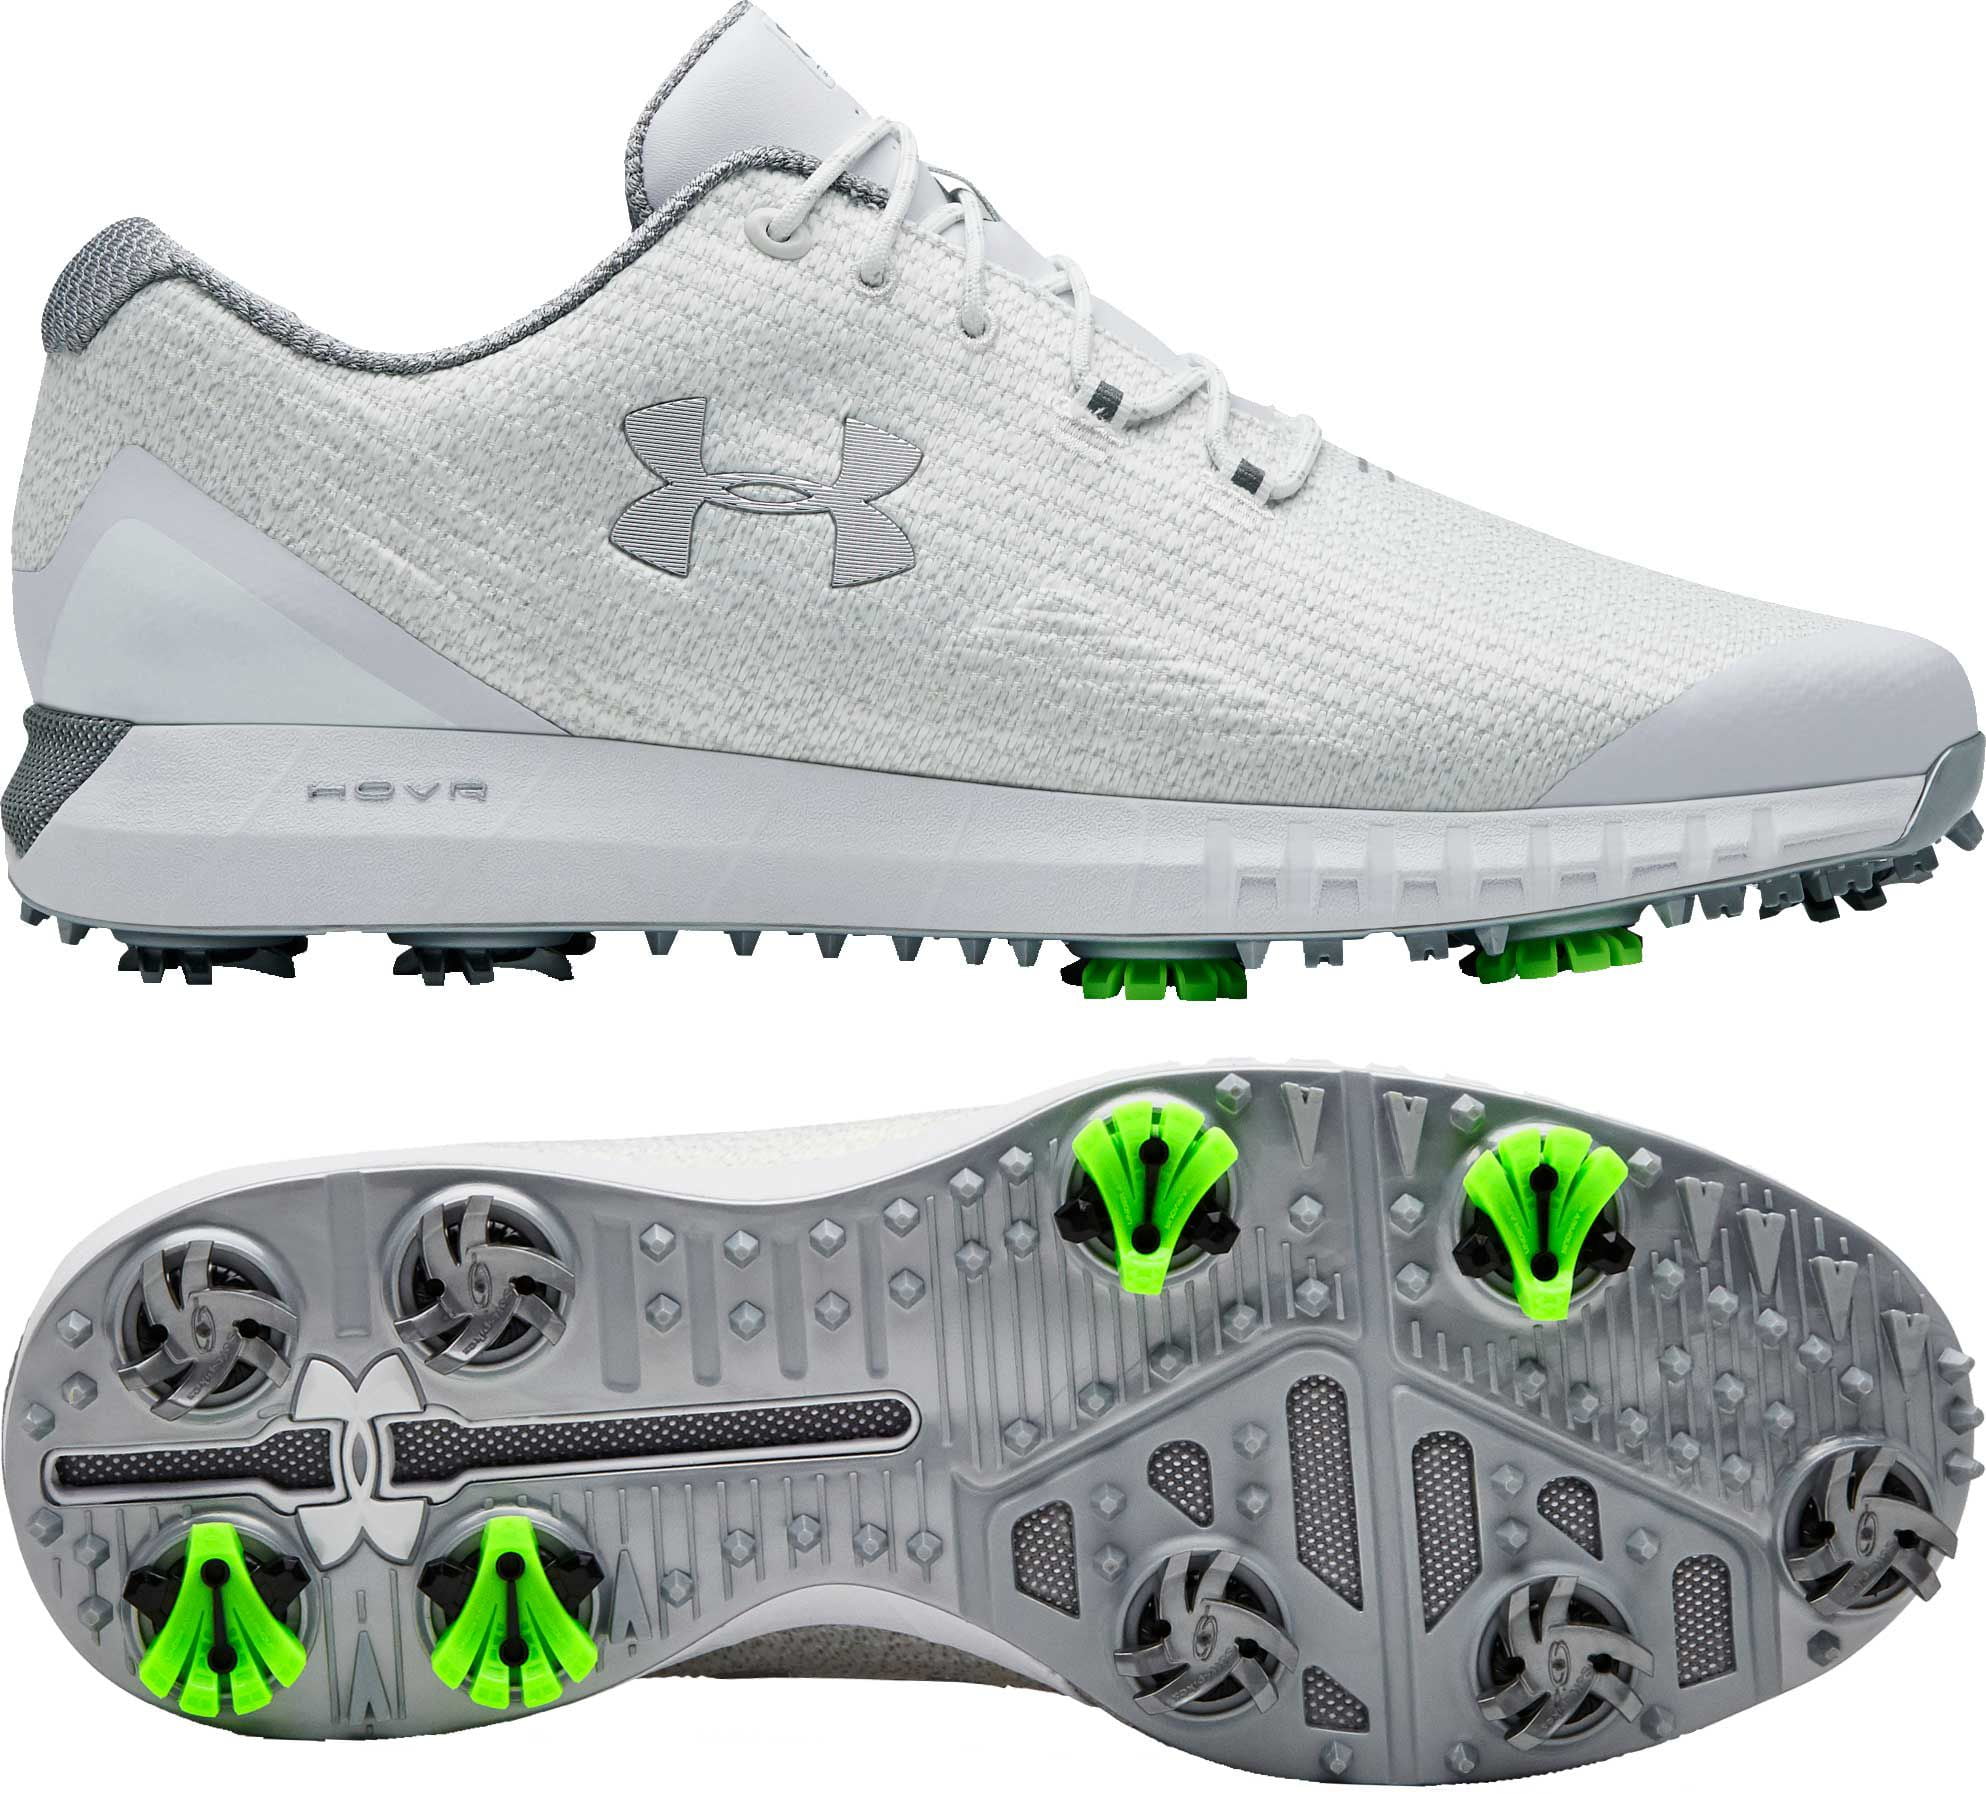 HOVR Drive Woven Golf Shoes 